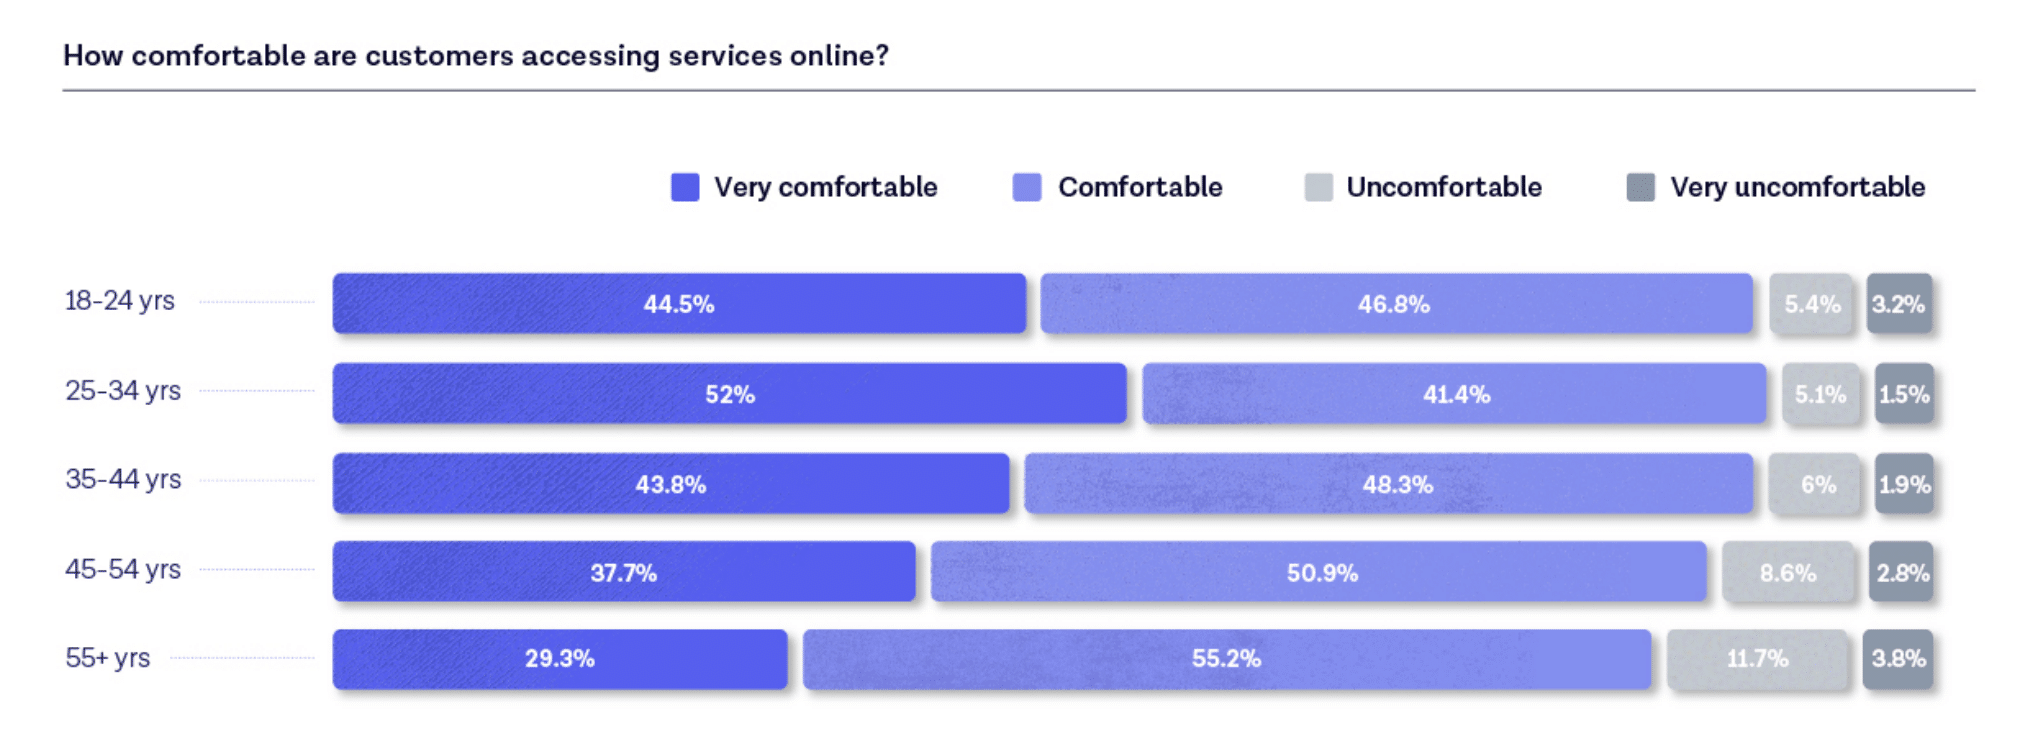 How comfortable customers are accessing services online